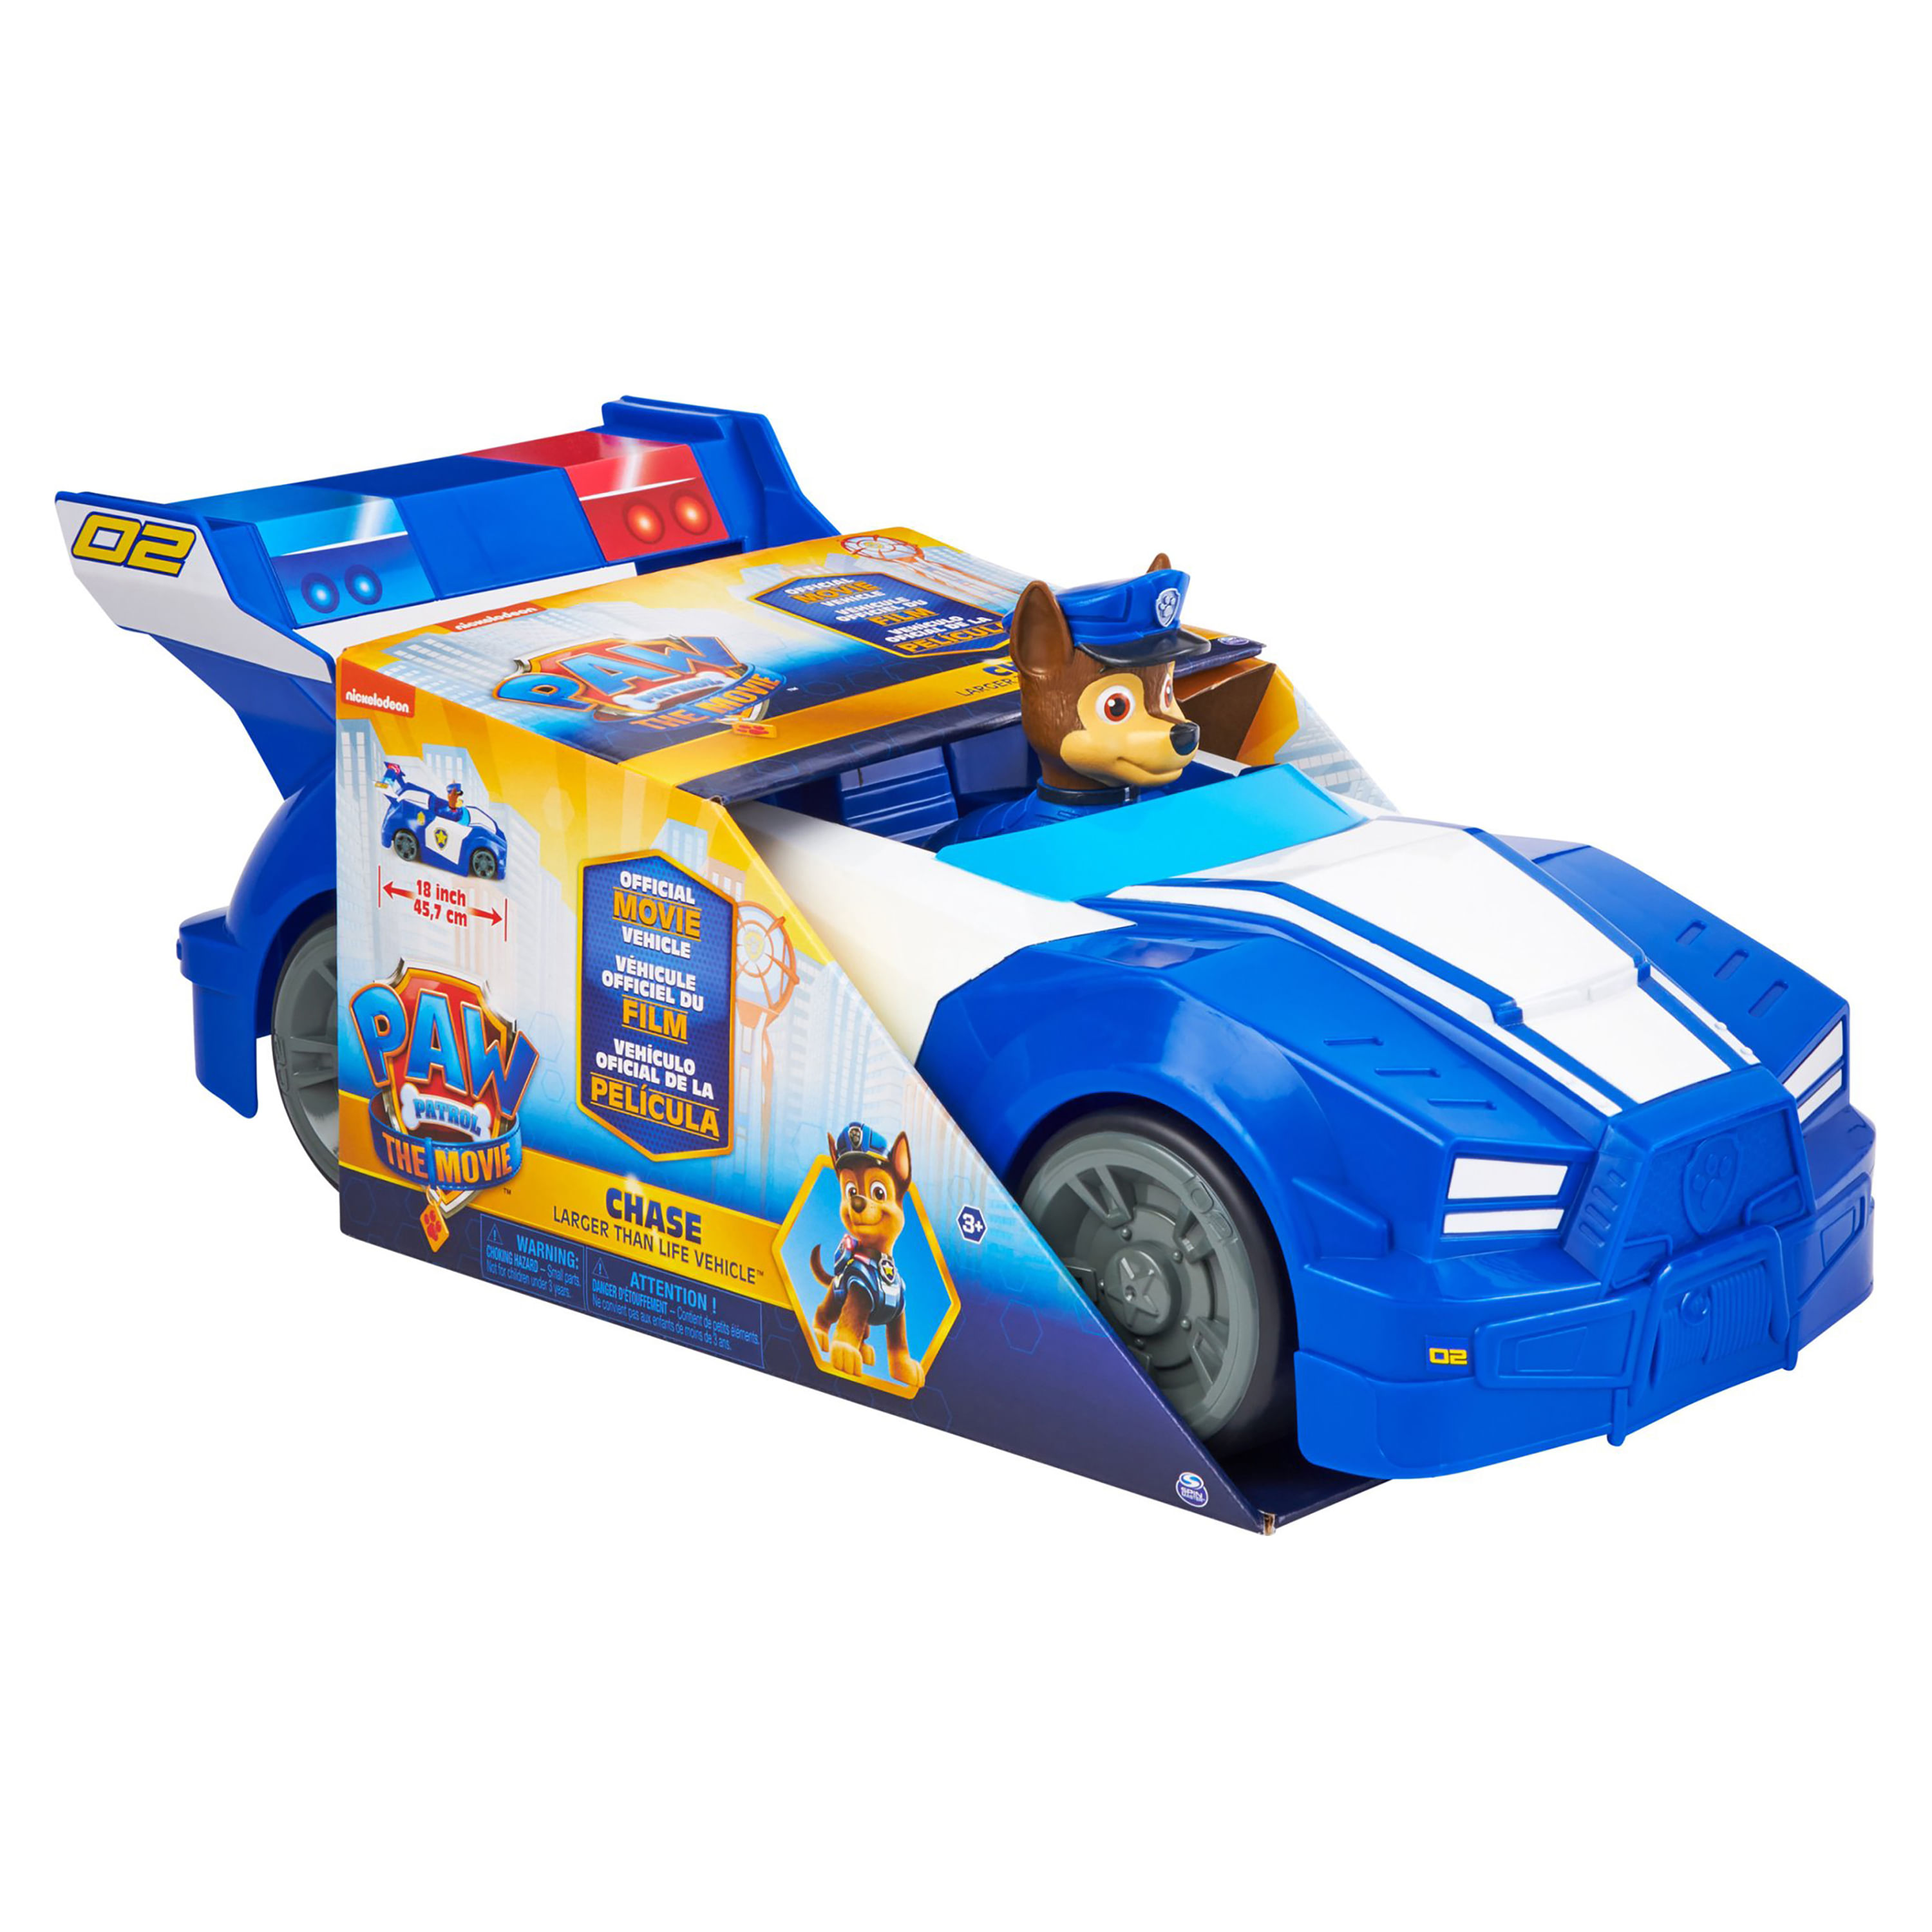 Paw-Patrol-The-Movie-Vehicles-Chase-1-11814